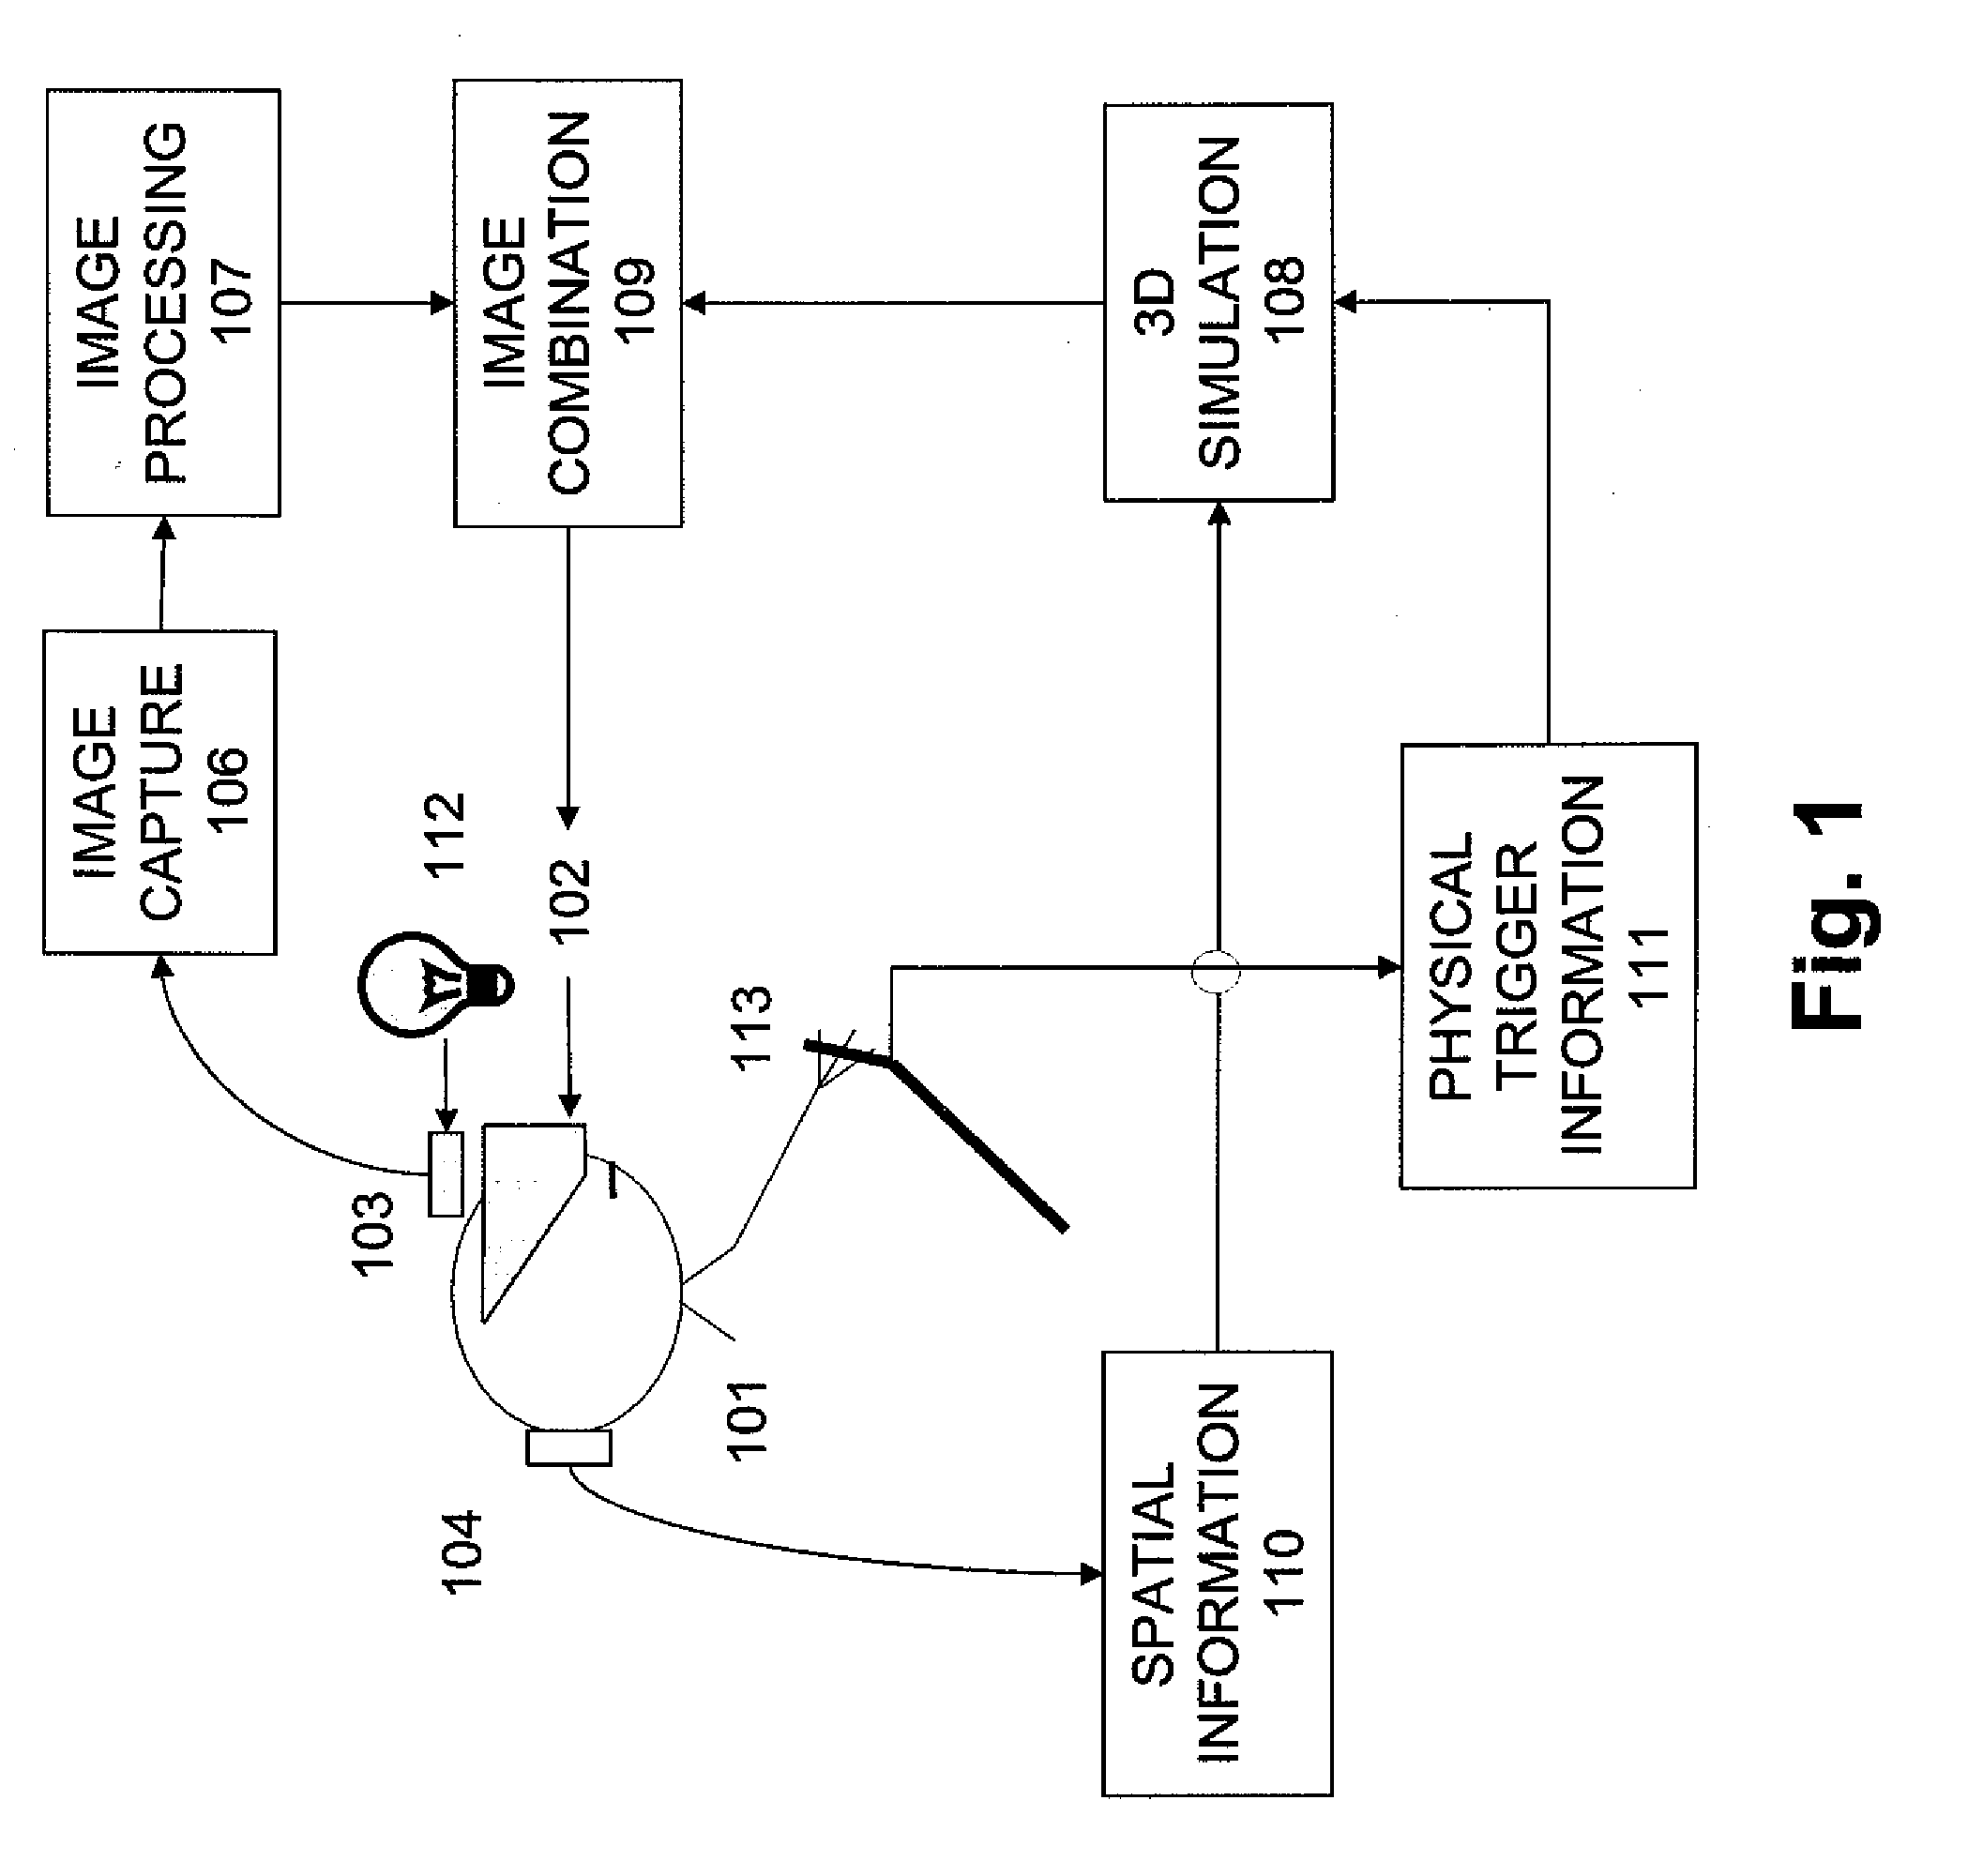 Systems and methods for combining virtual and real-time physical environments